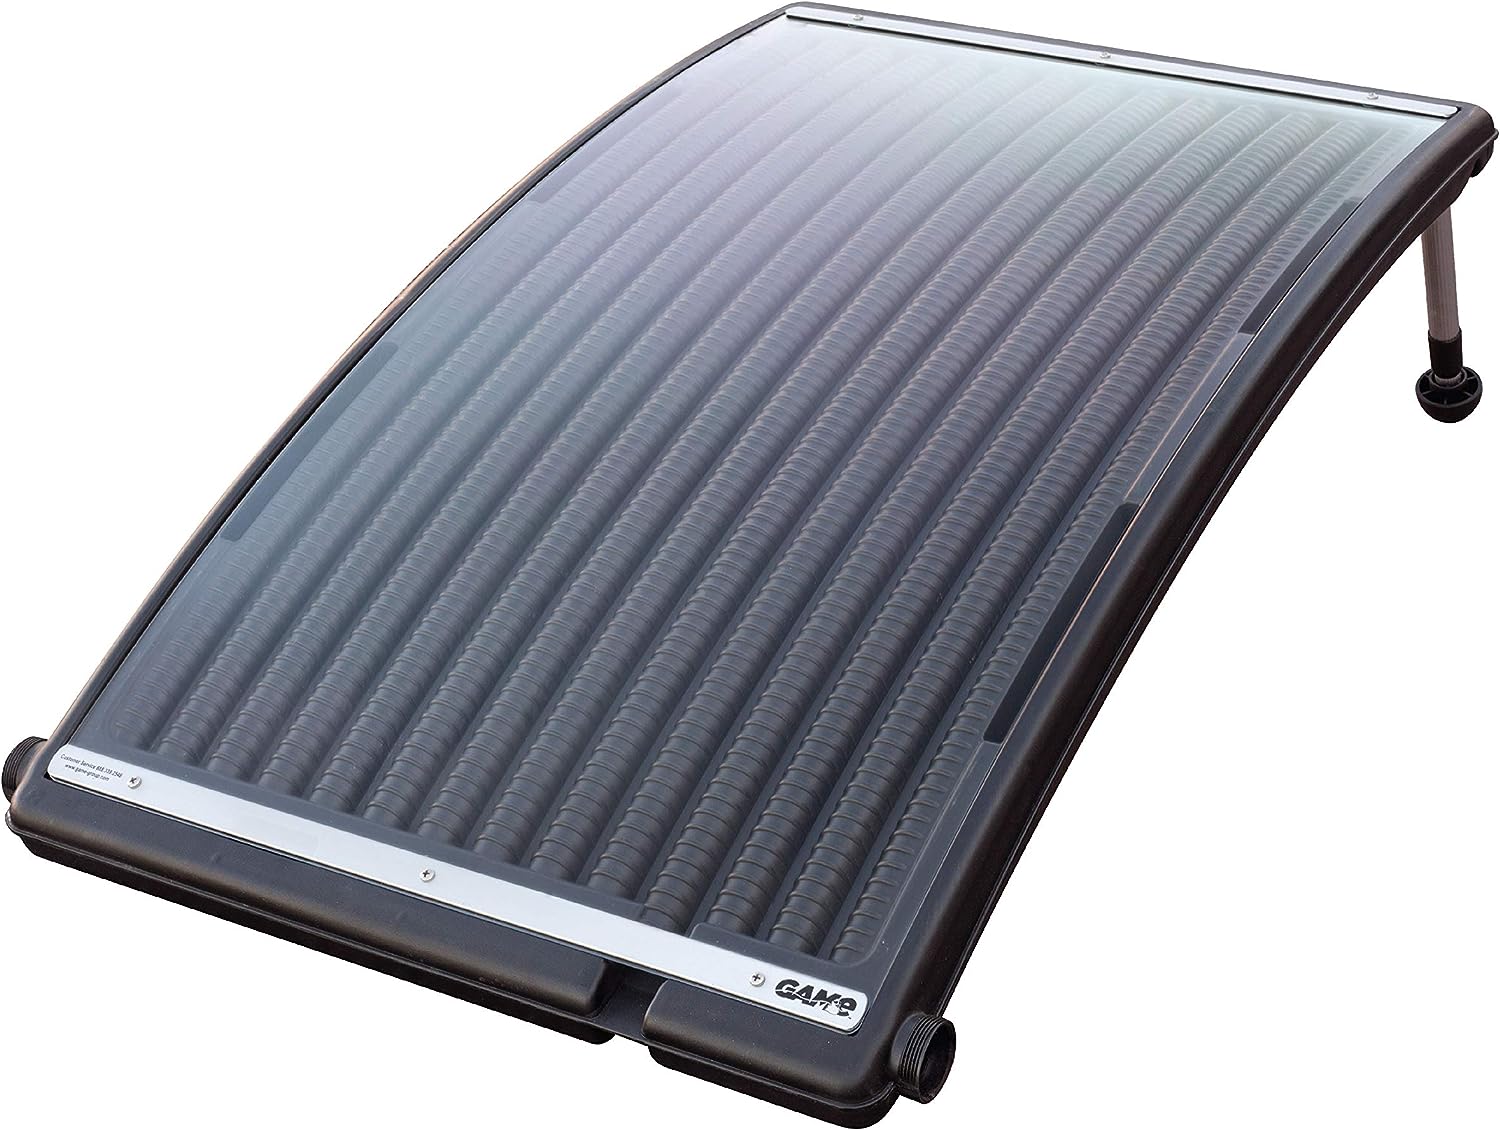 GAME 4721-BB SolarPRO Curve Solar Pool Heater Review